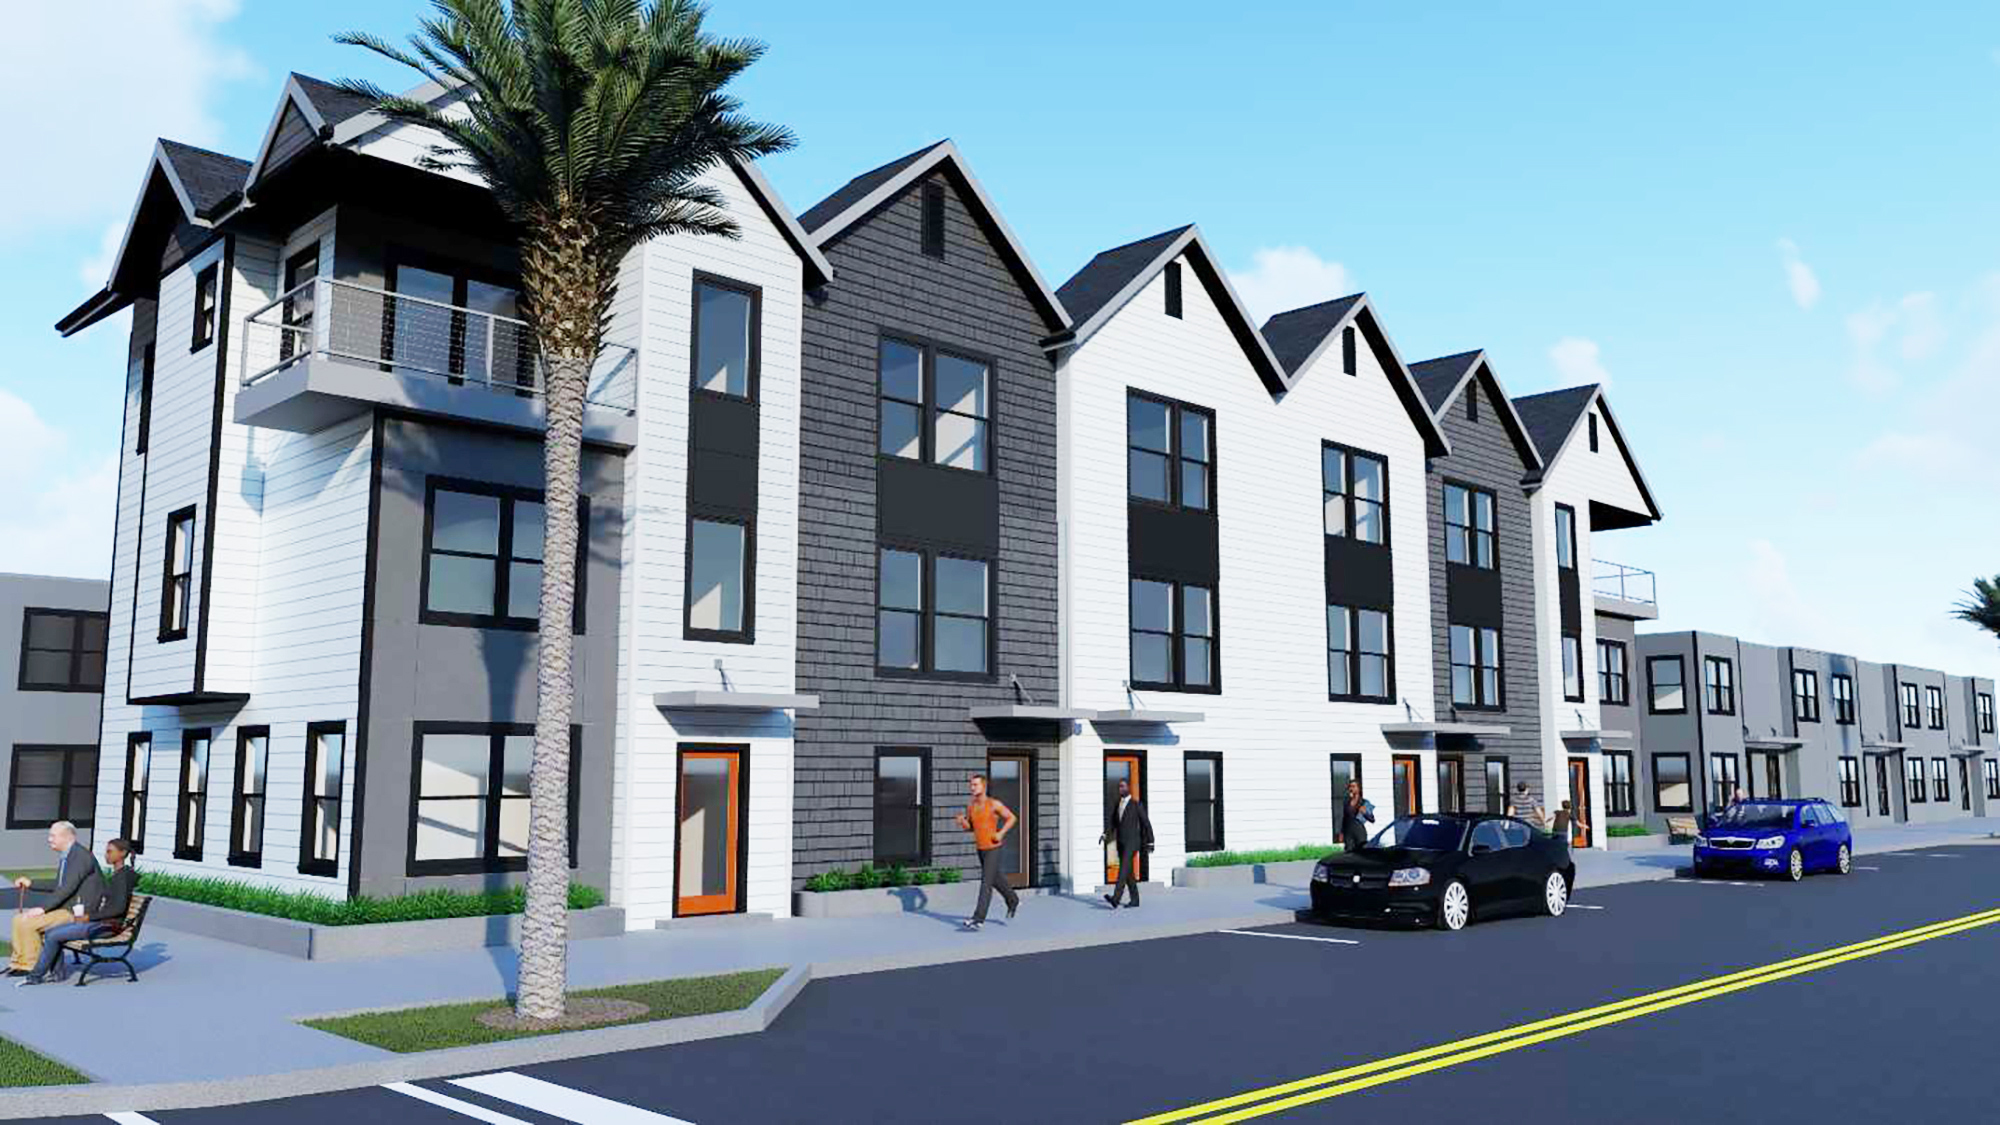 Johnson Commons would offer 107 for-sale townhomes.